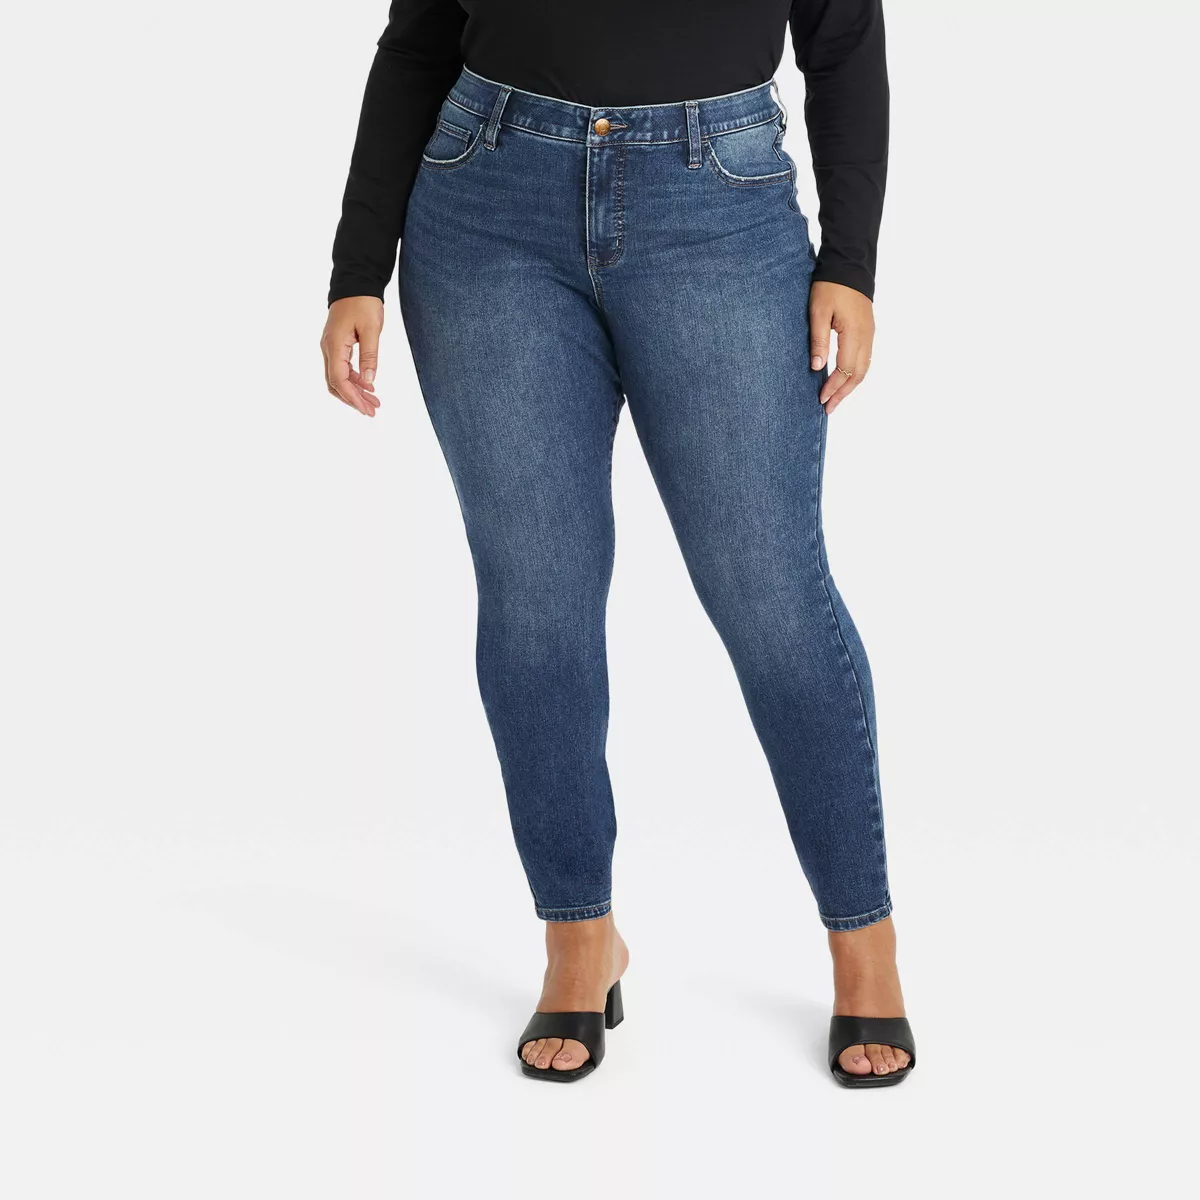 Old Navy + FitsYou 3-Sizes-in-1 Extra High-Waisted Rockstar Super